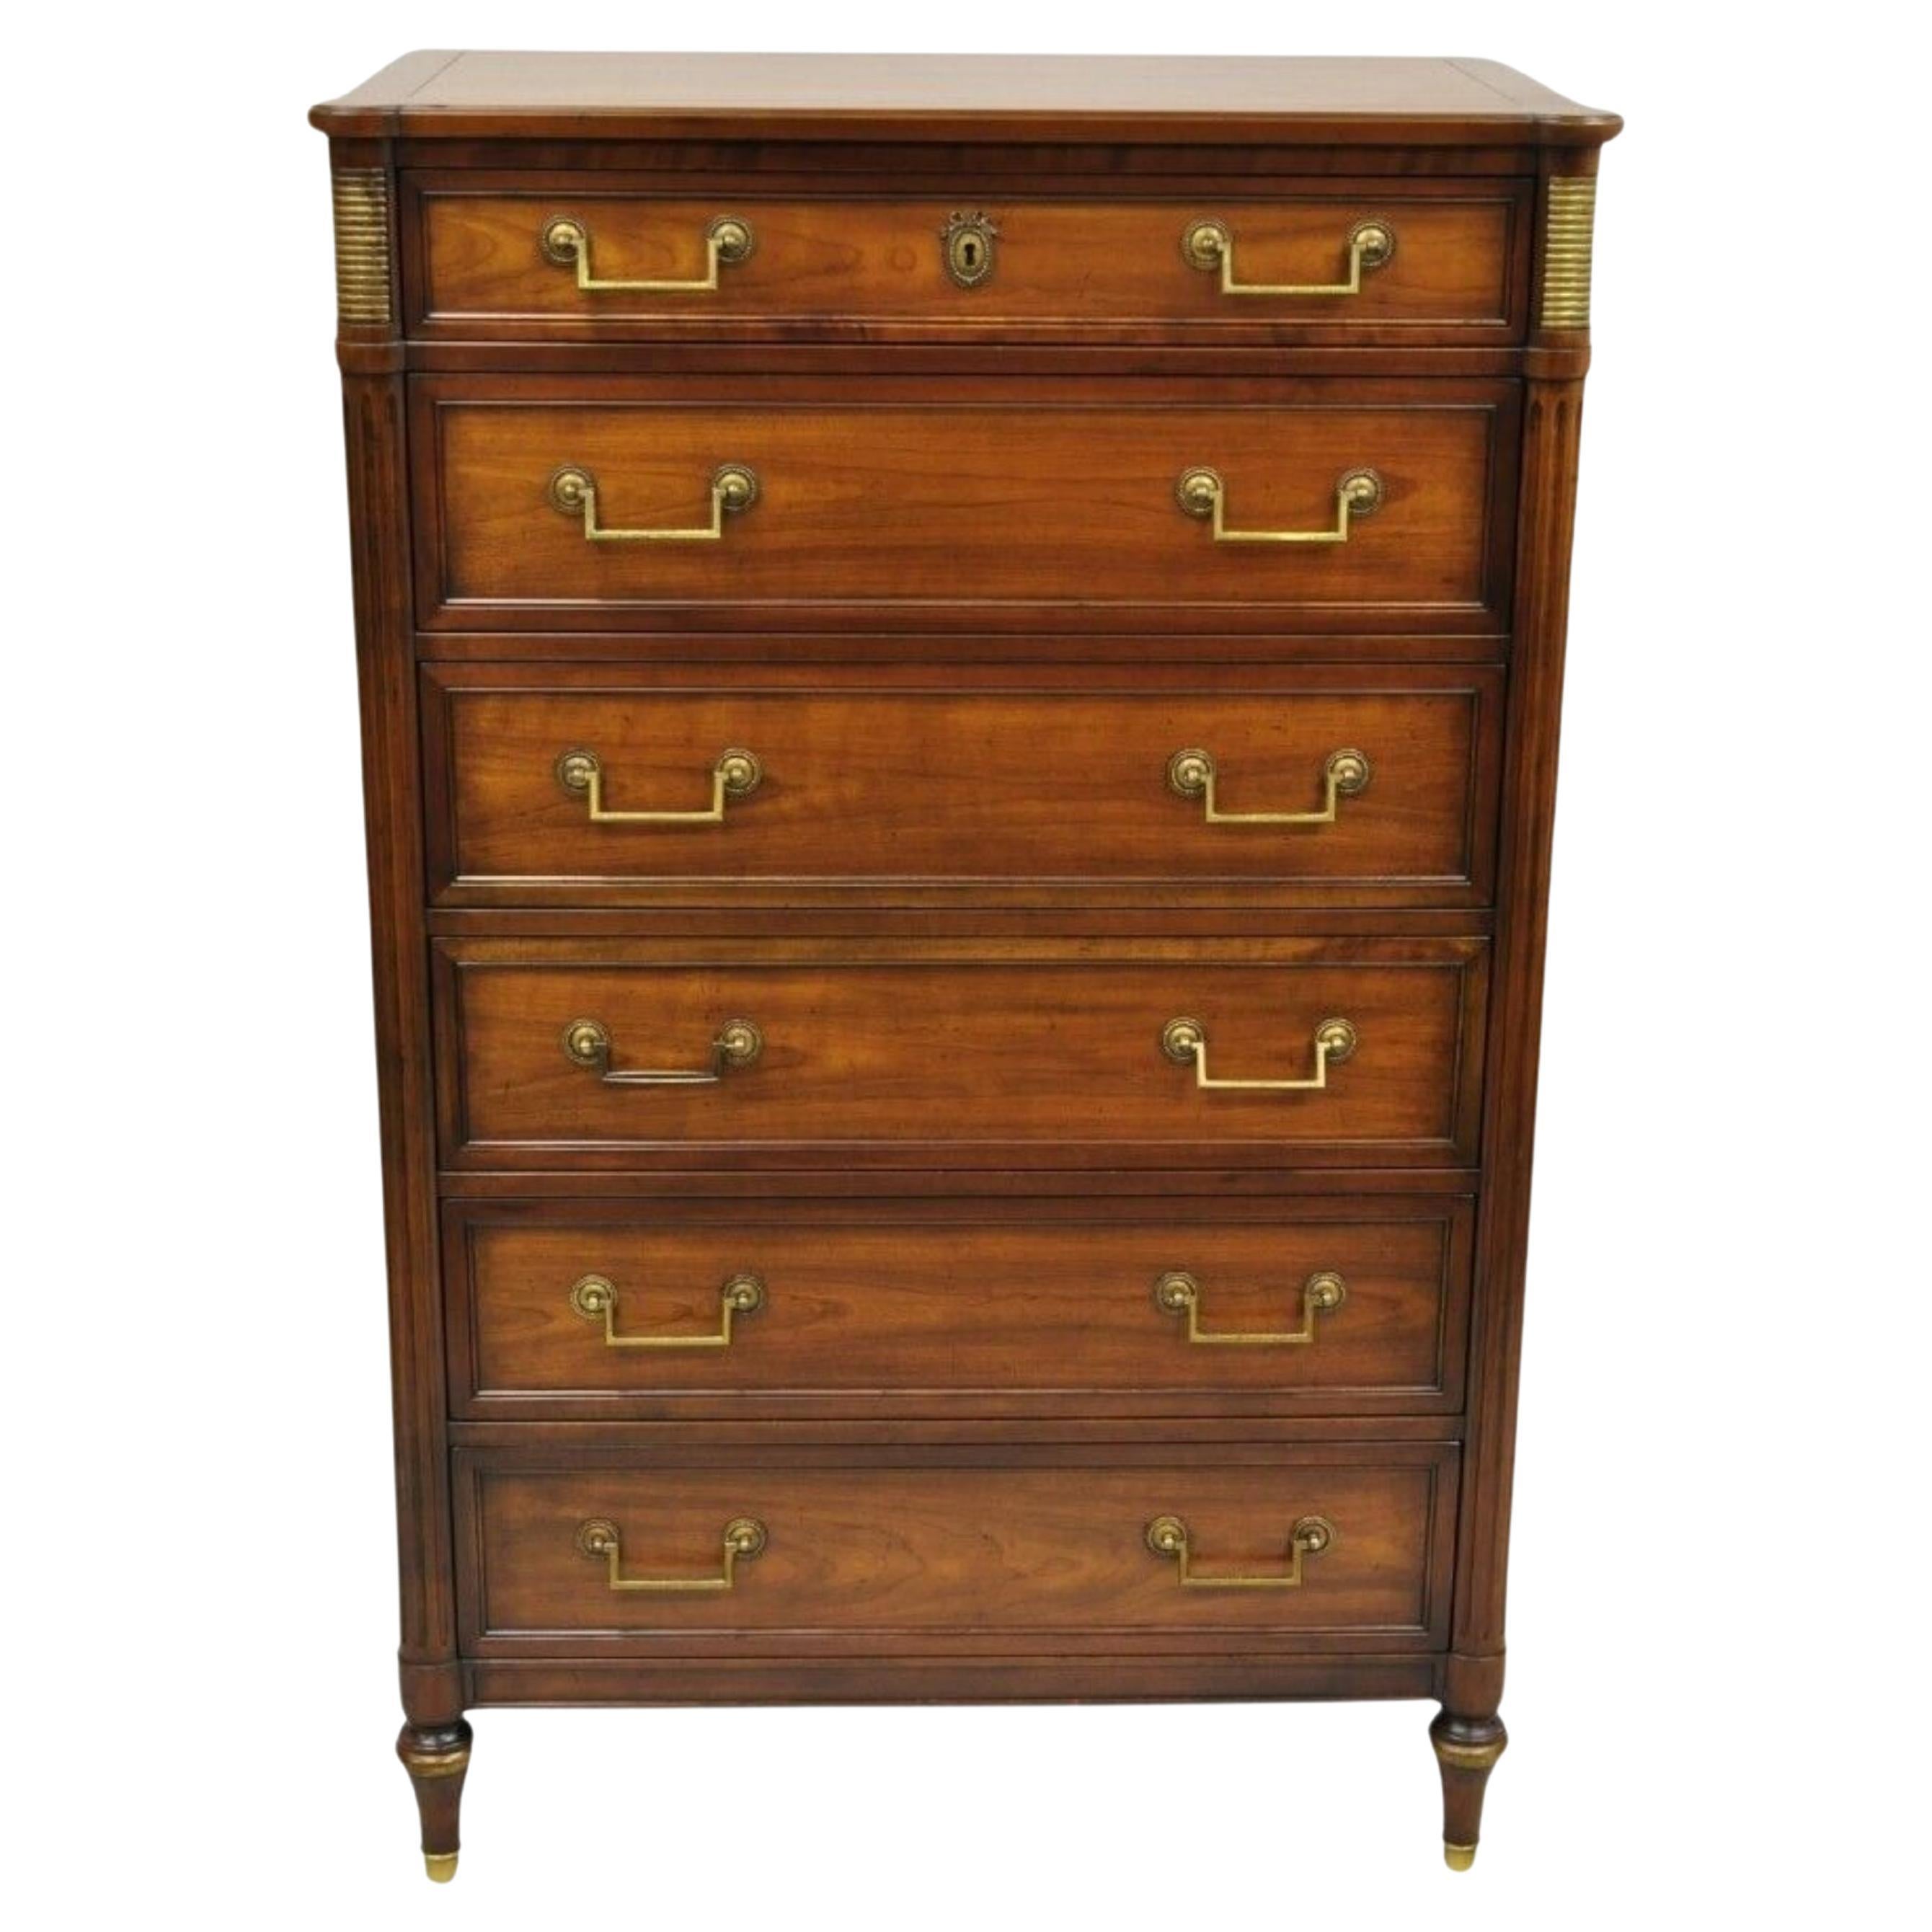 Kindel Milano Louis XVI Style 6 Drawer Highboy Cherry Wood Tall Chest Dresser For Sale